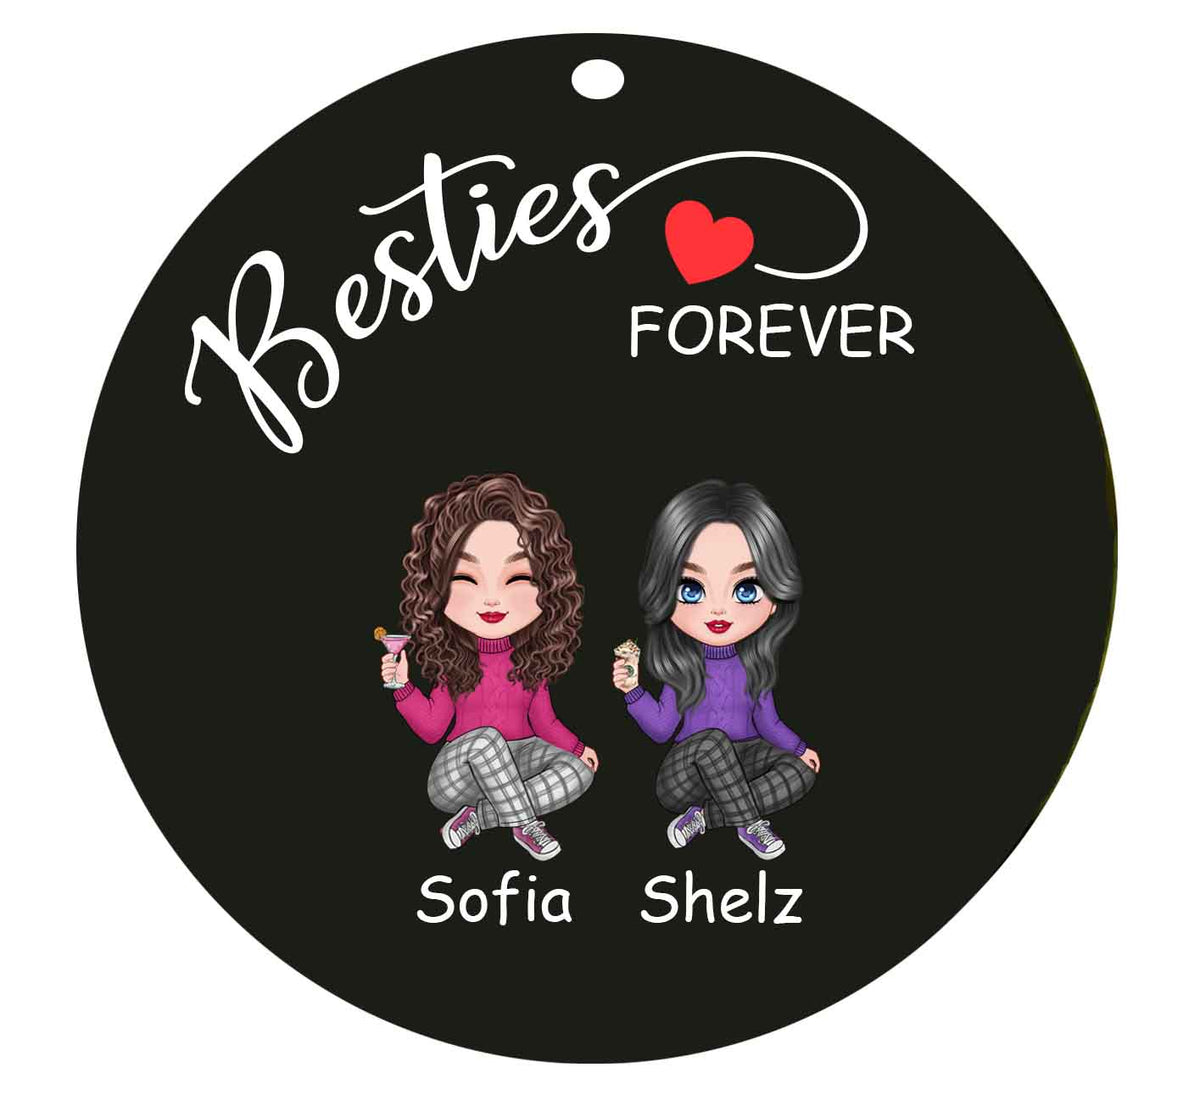 Besties Forever - Personalized Customized Gift Keychain